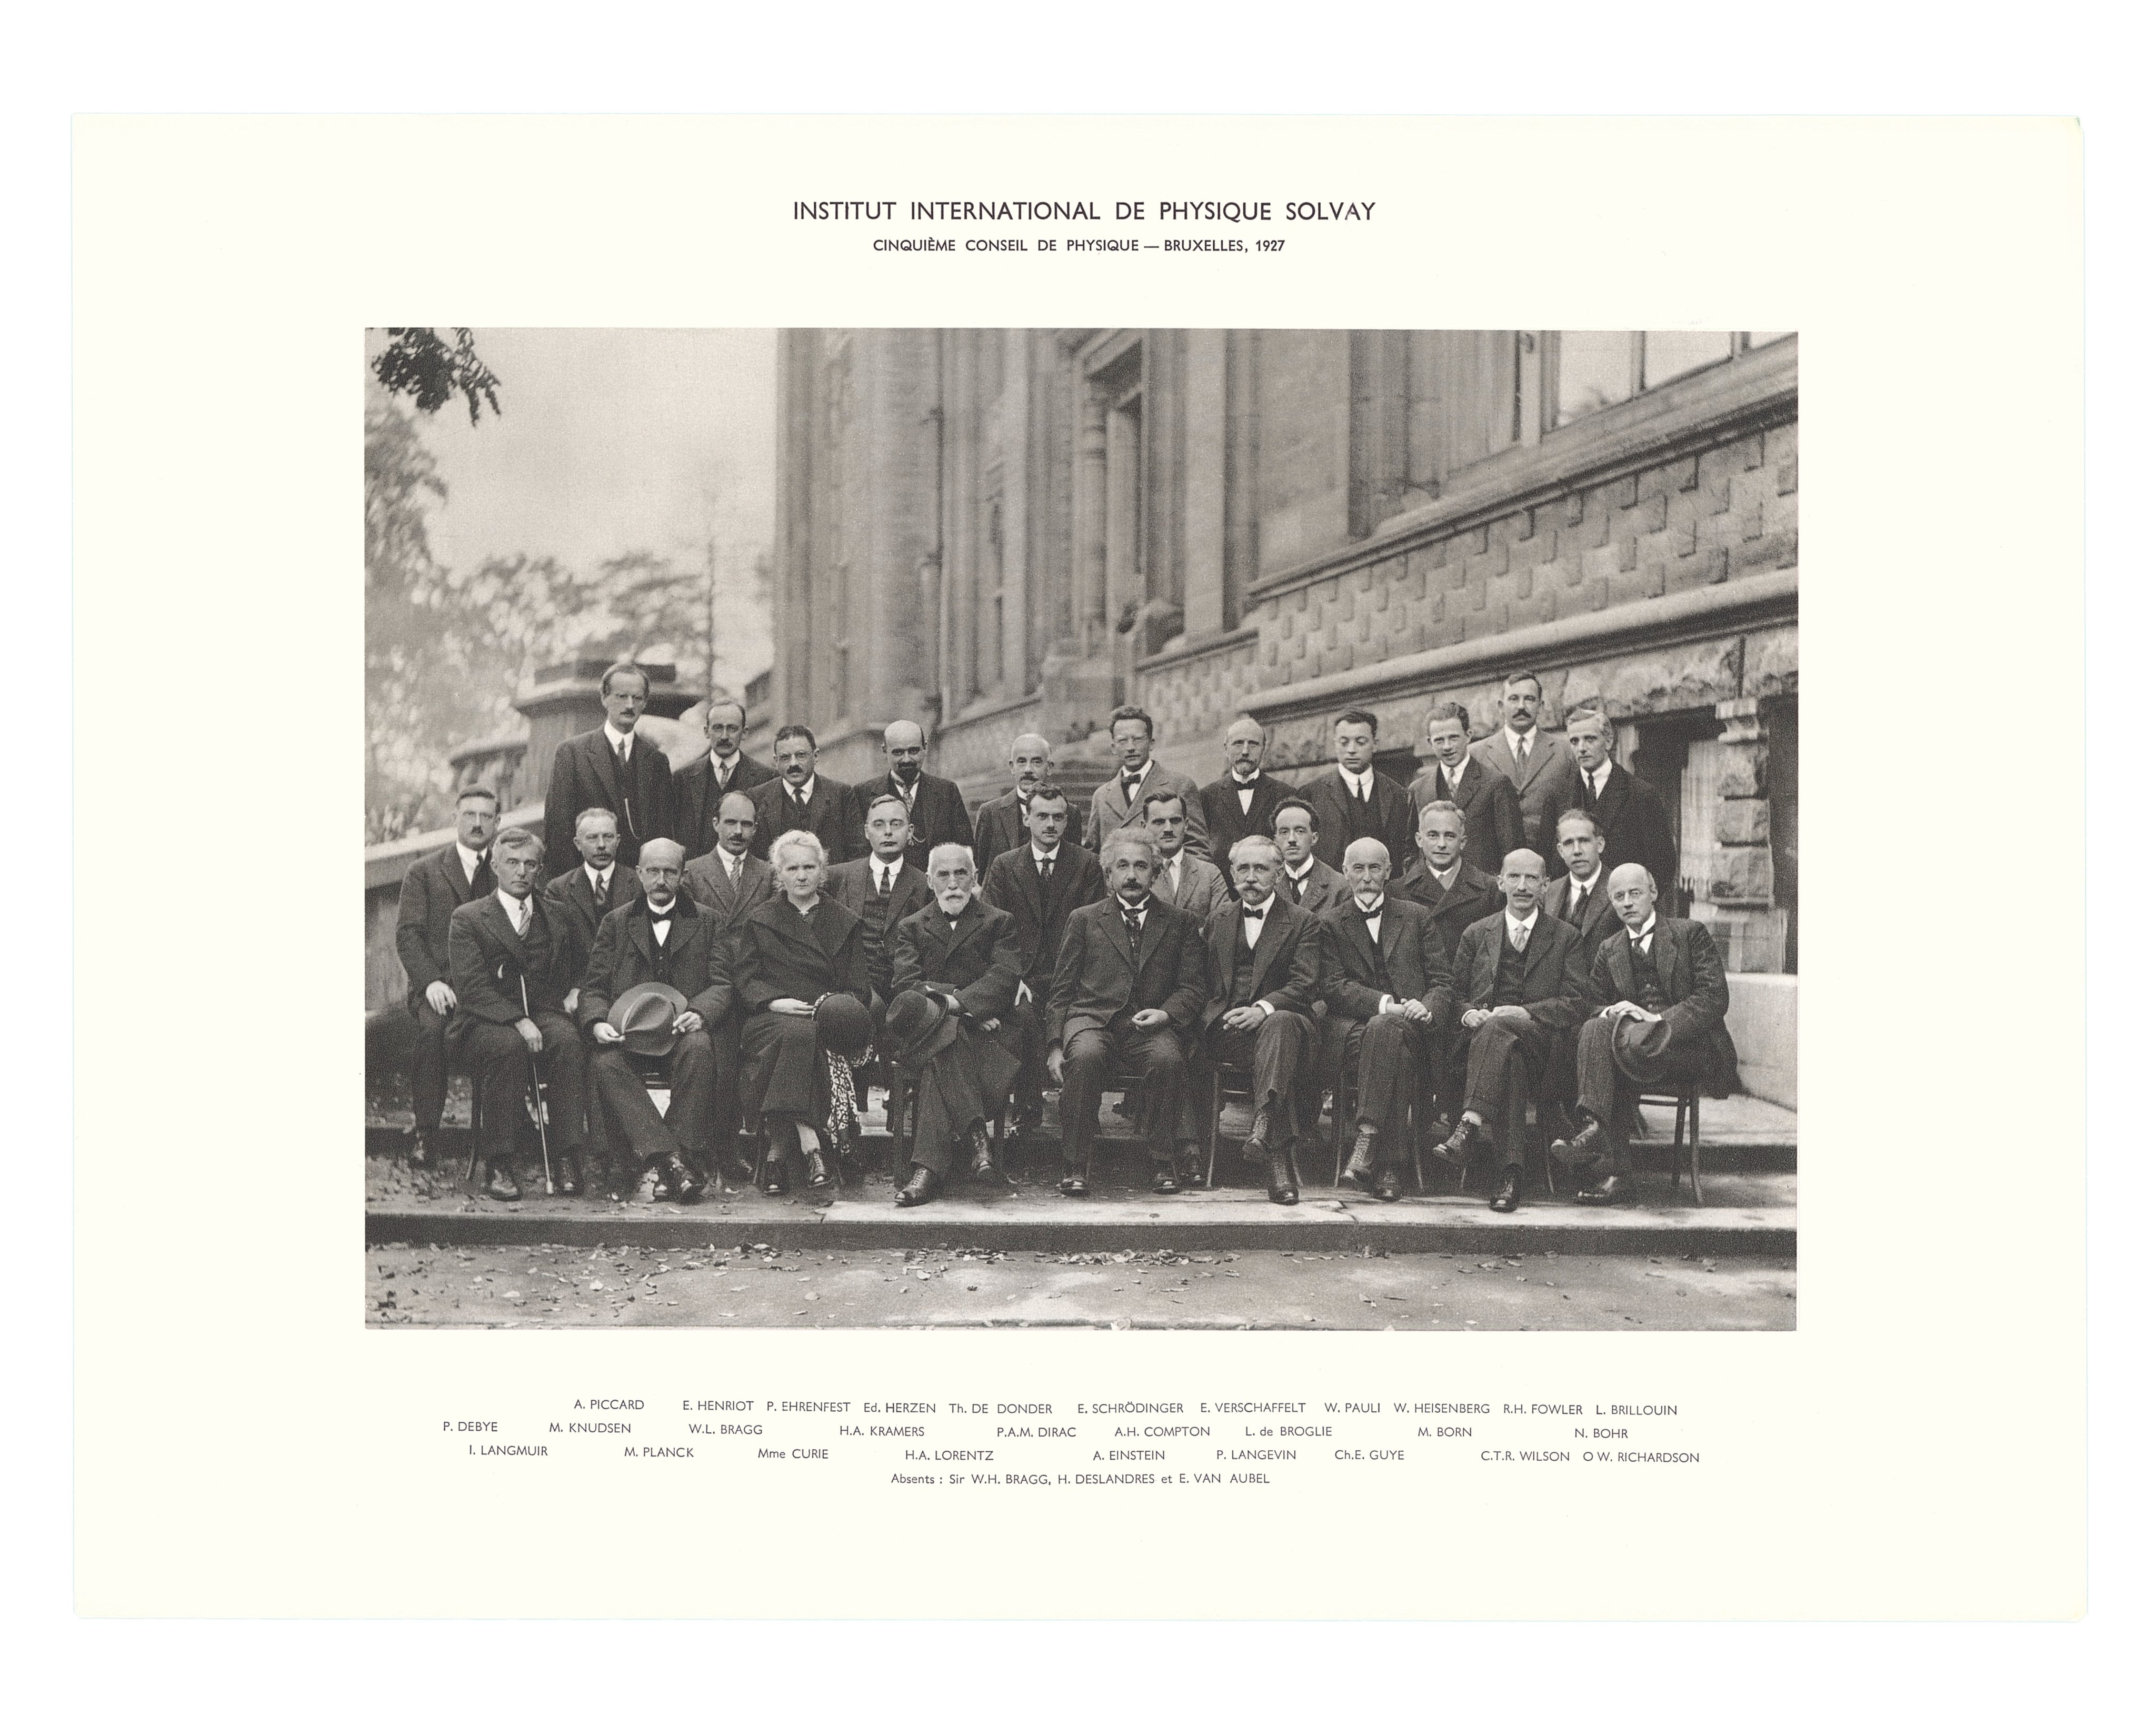 Cefic On Twitter: 📷The Iconic Picture Made In 1927 During The #Solvay  International Conference On #Electrons And #Photons. This World-Famous  Photo Shows The Prime Of The Scientific Leadership Of That Time. 👇